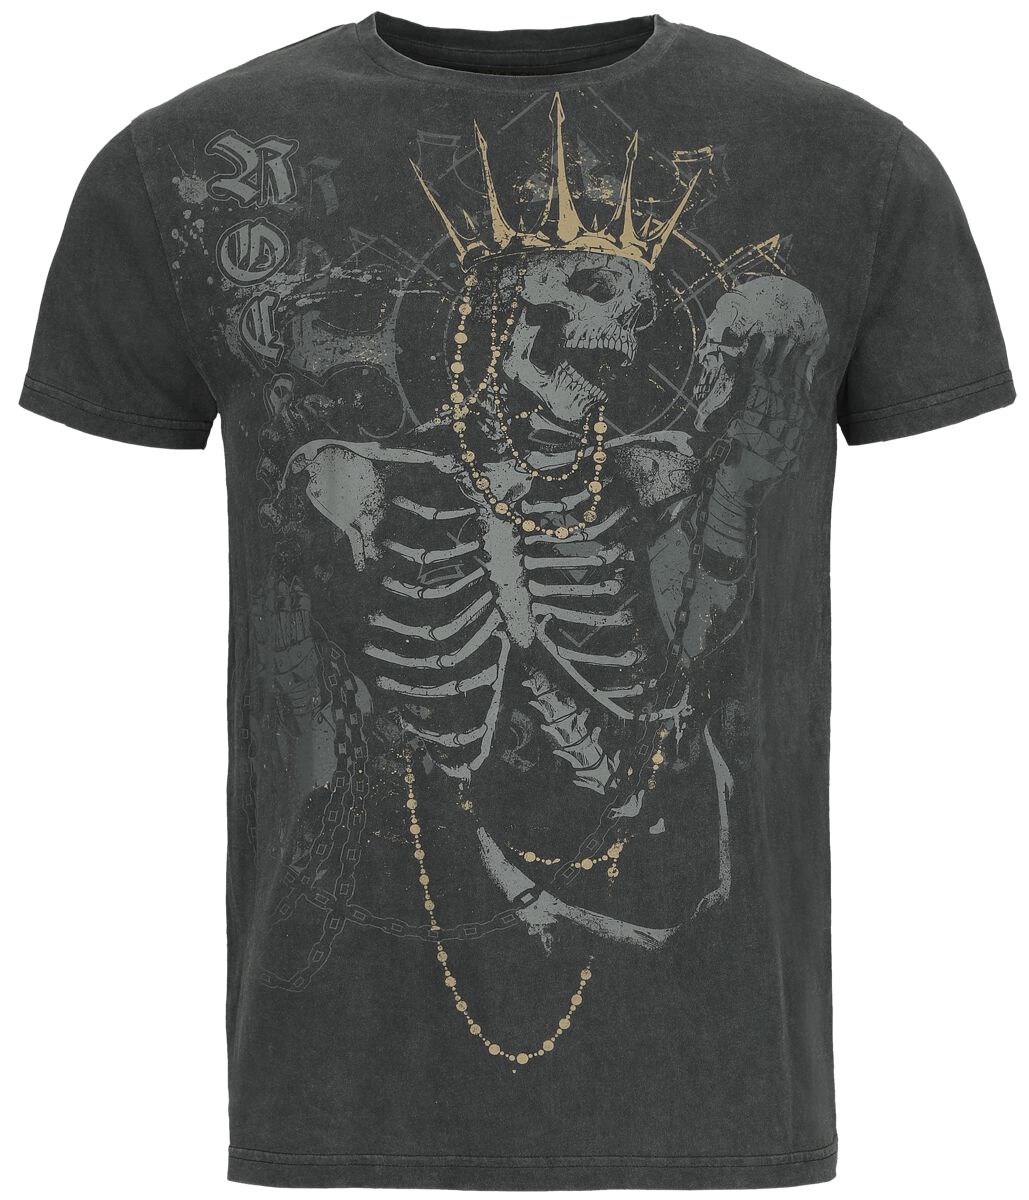 Image of T-Shirt di Rock Rebel by EMP - T-shirt with skull and crown print - M a XXL - Uomo - nero